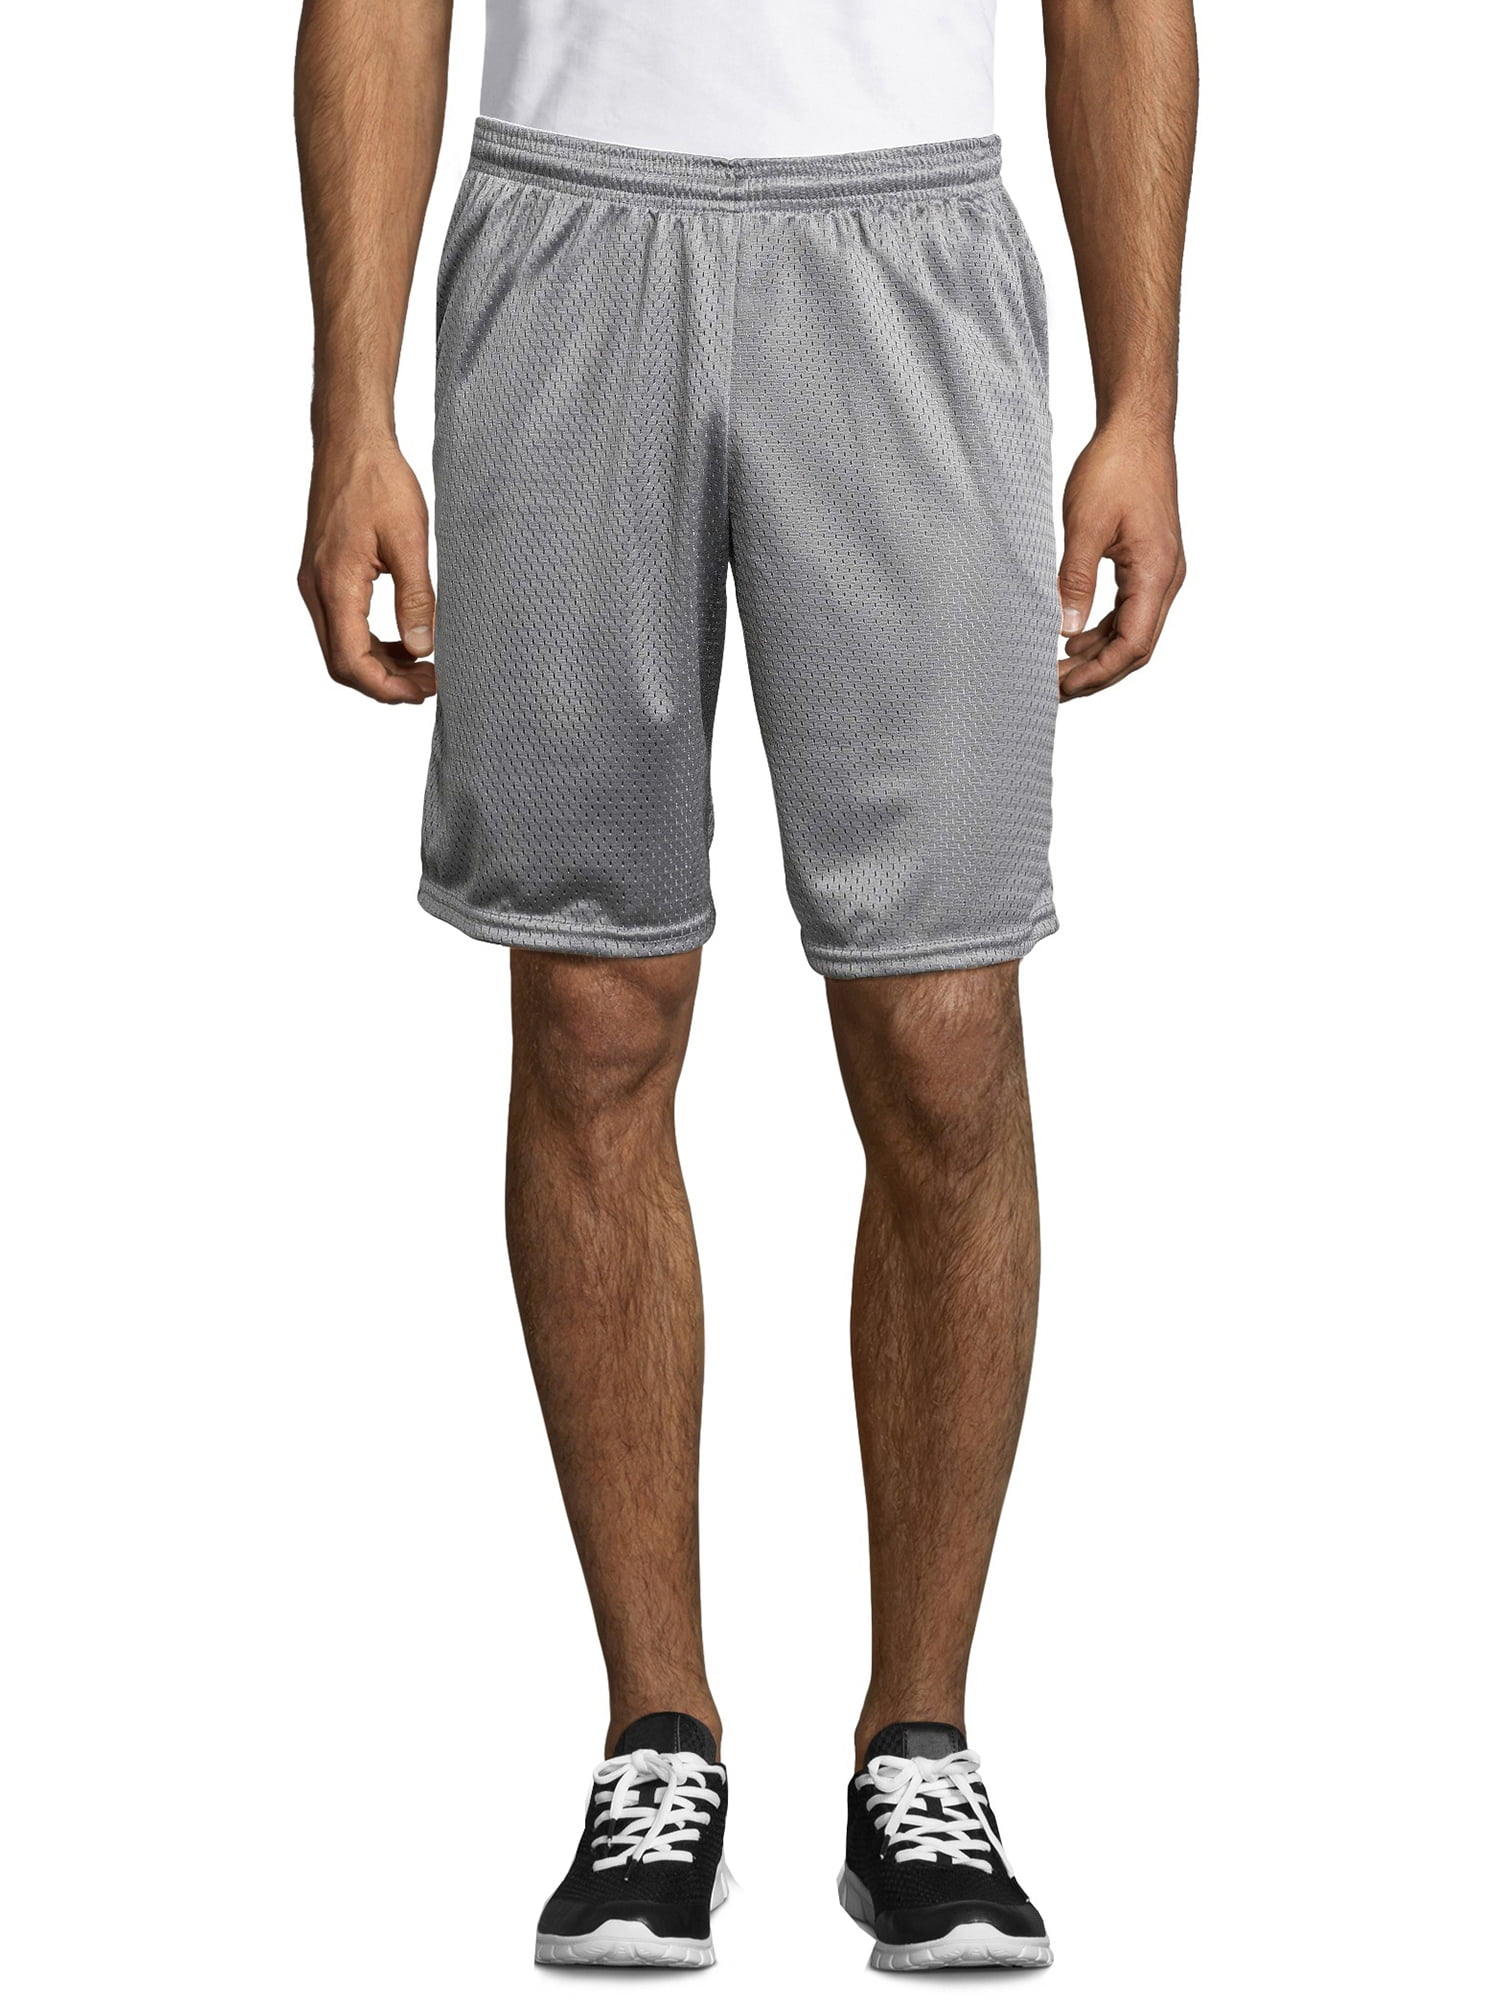 FREE SHIPPING 0088 Under Armour Men's Athletic Basketball Gym No Pocket Shorts 